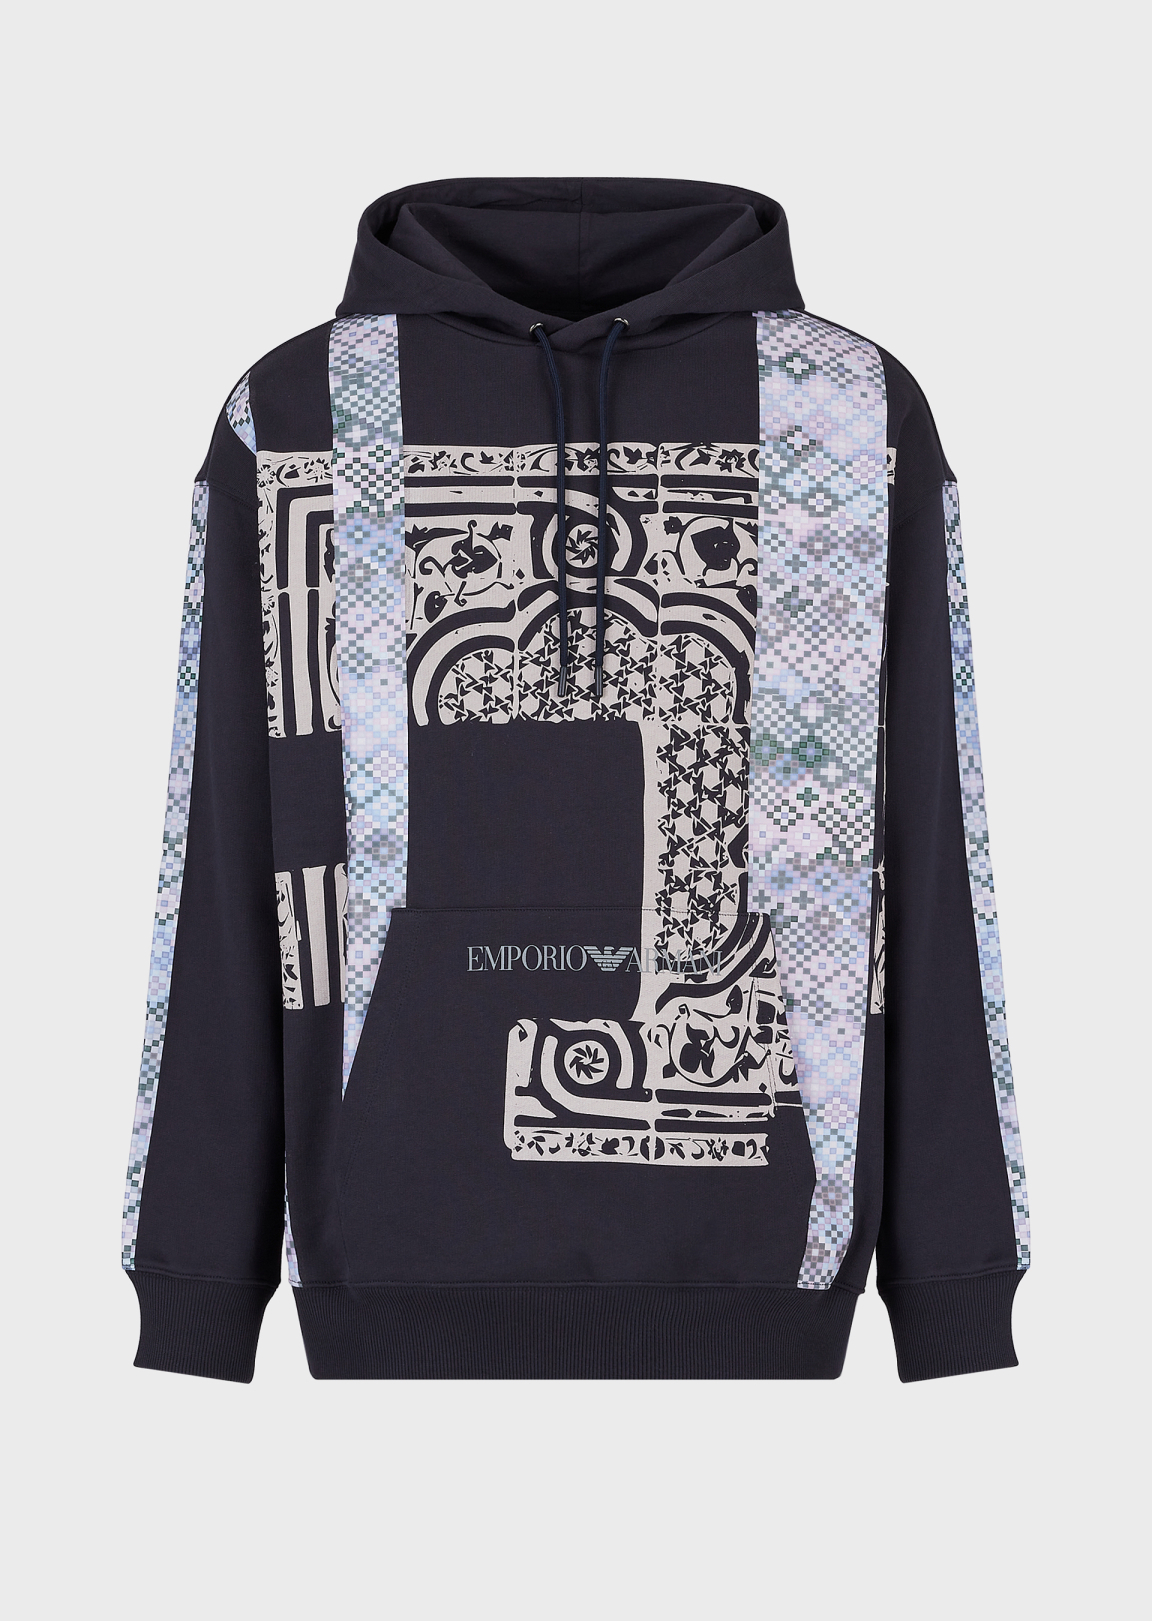 Emporio Armani Hooded sweatshirt with print and Mexico Tile pattern inserts